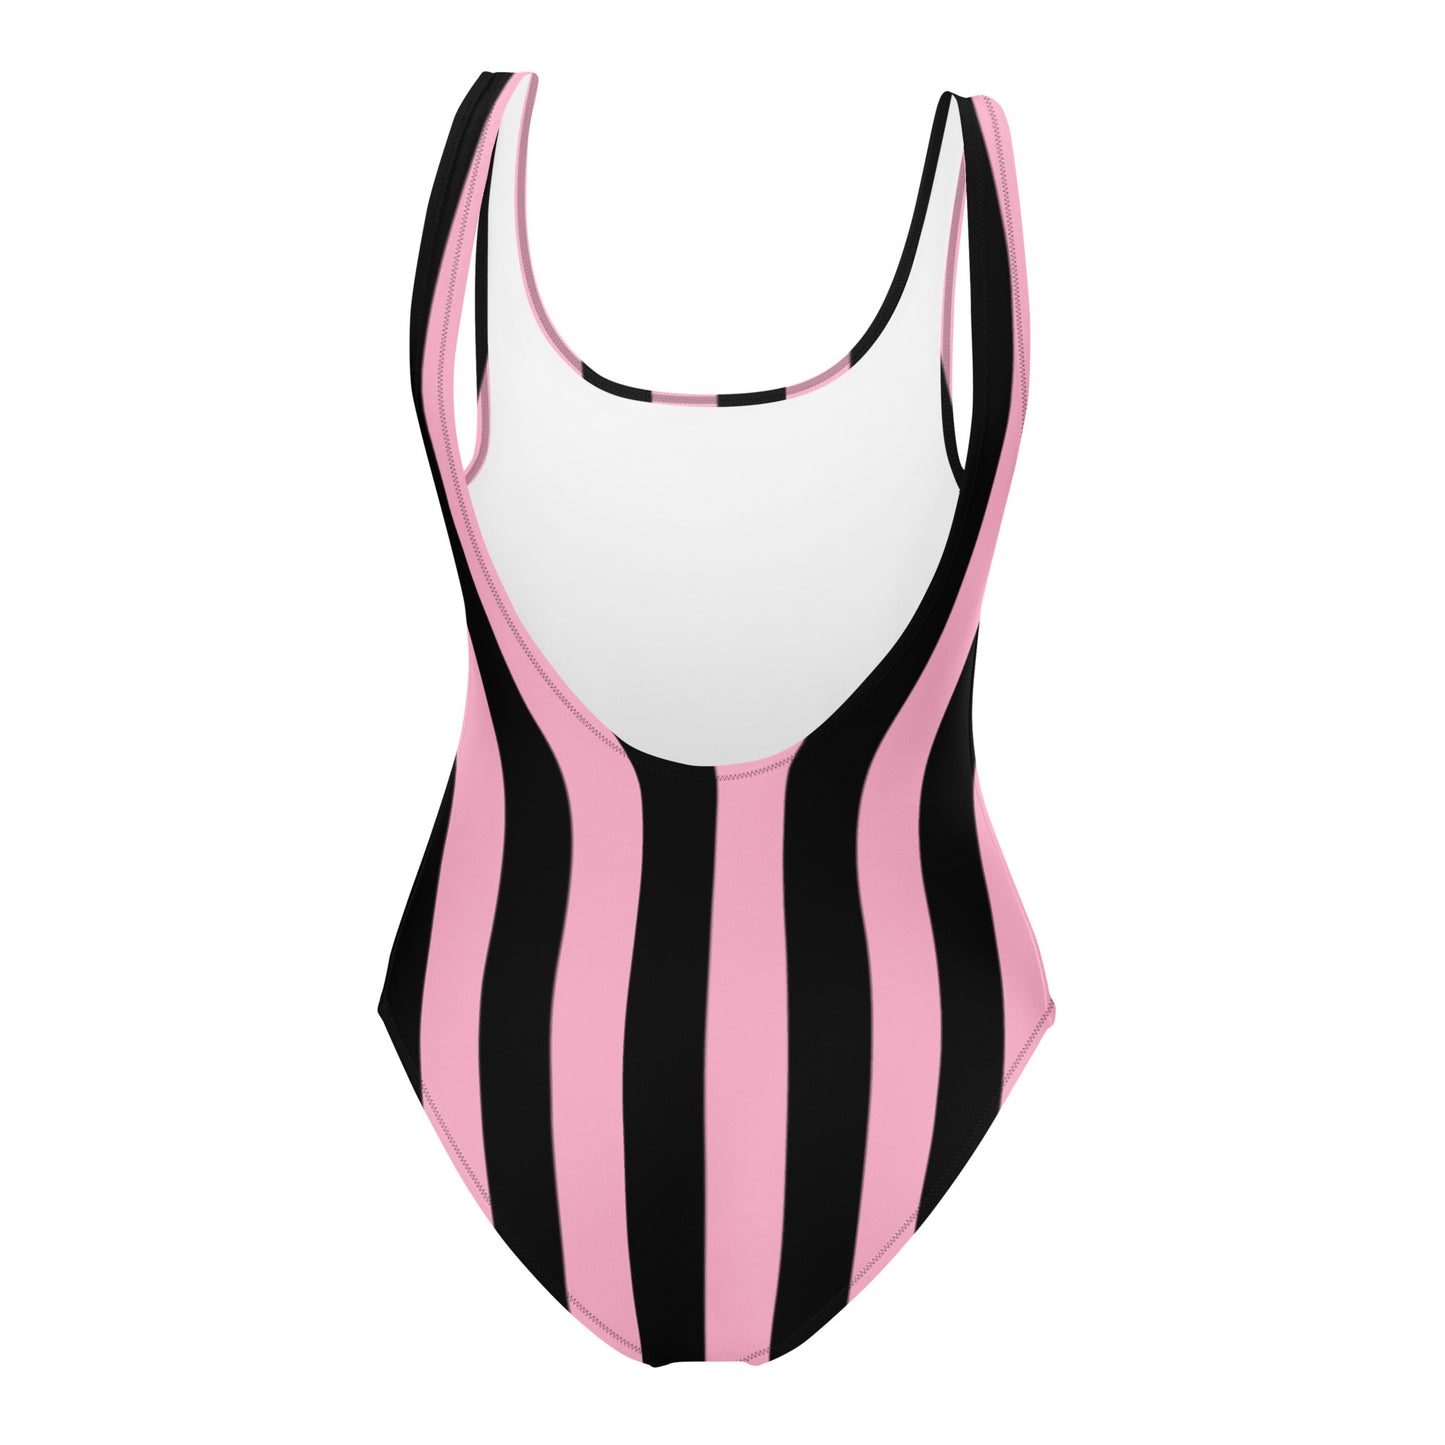 Rory Cotton Candy & Black Mark Stripe One-Piece Swimsuit | Pinup Couture Swim